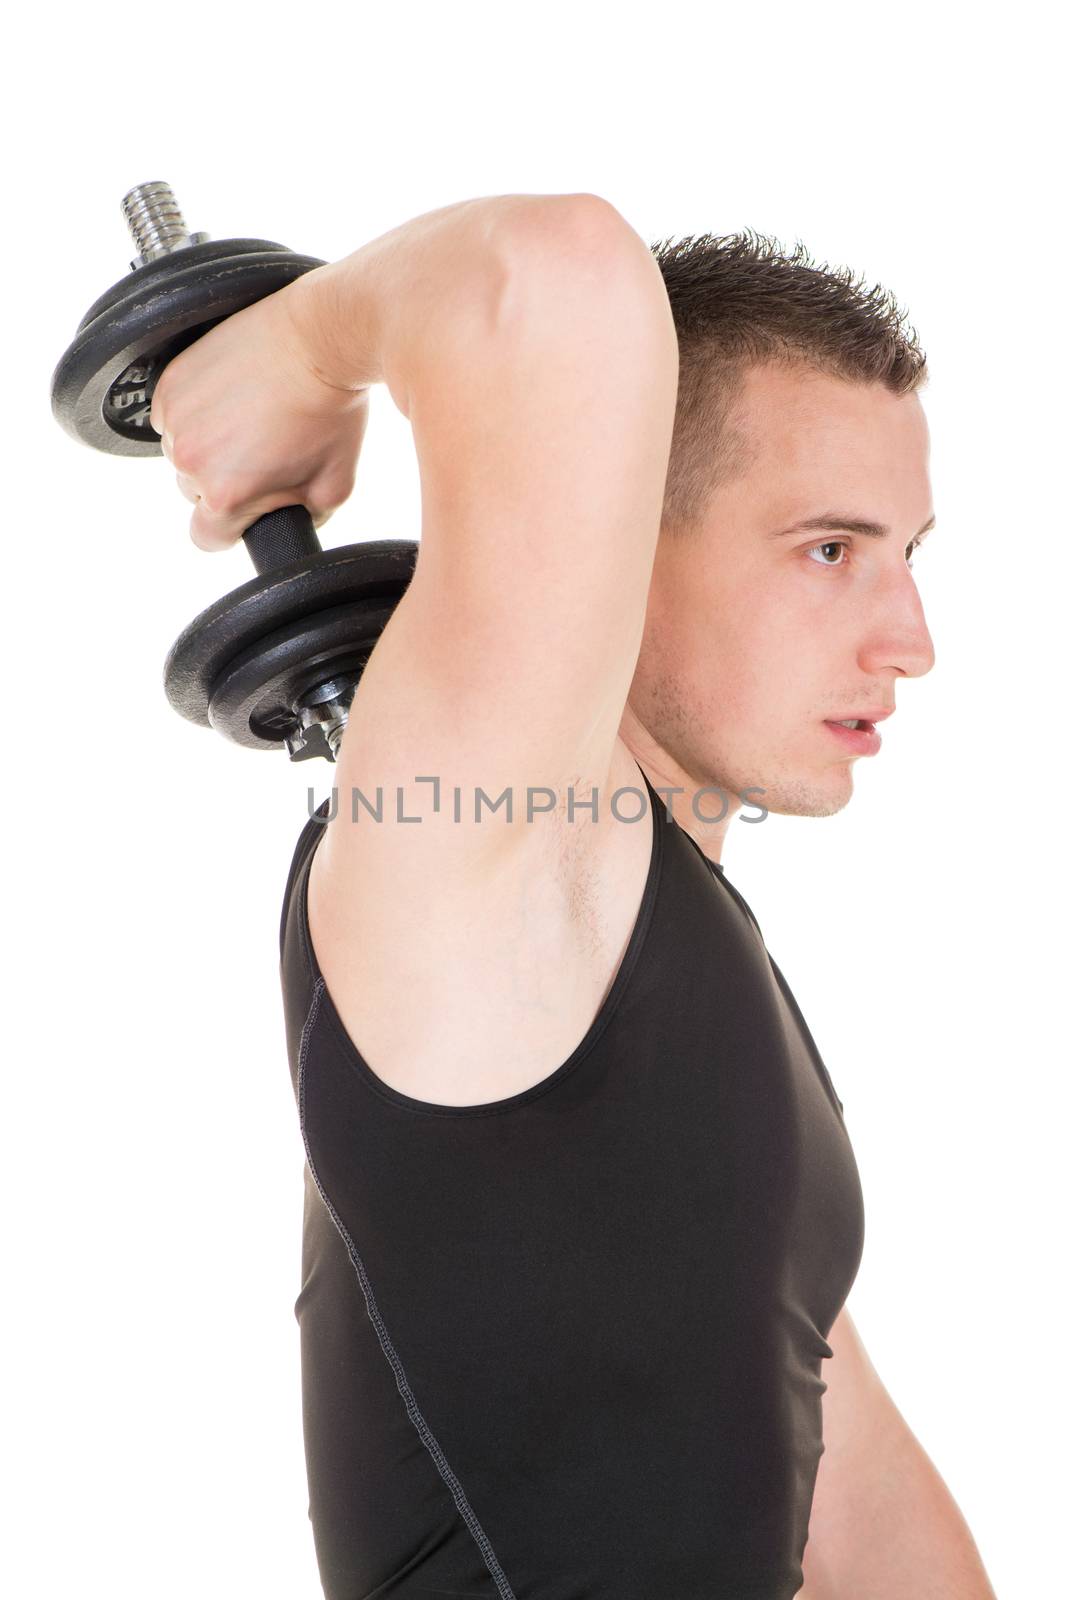 Sporty young man doing exercise to strengthen his triceps with dumbbells.